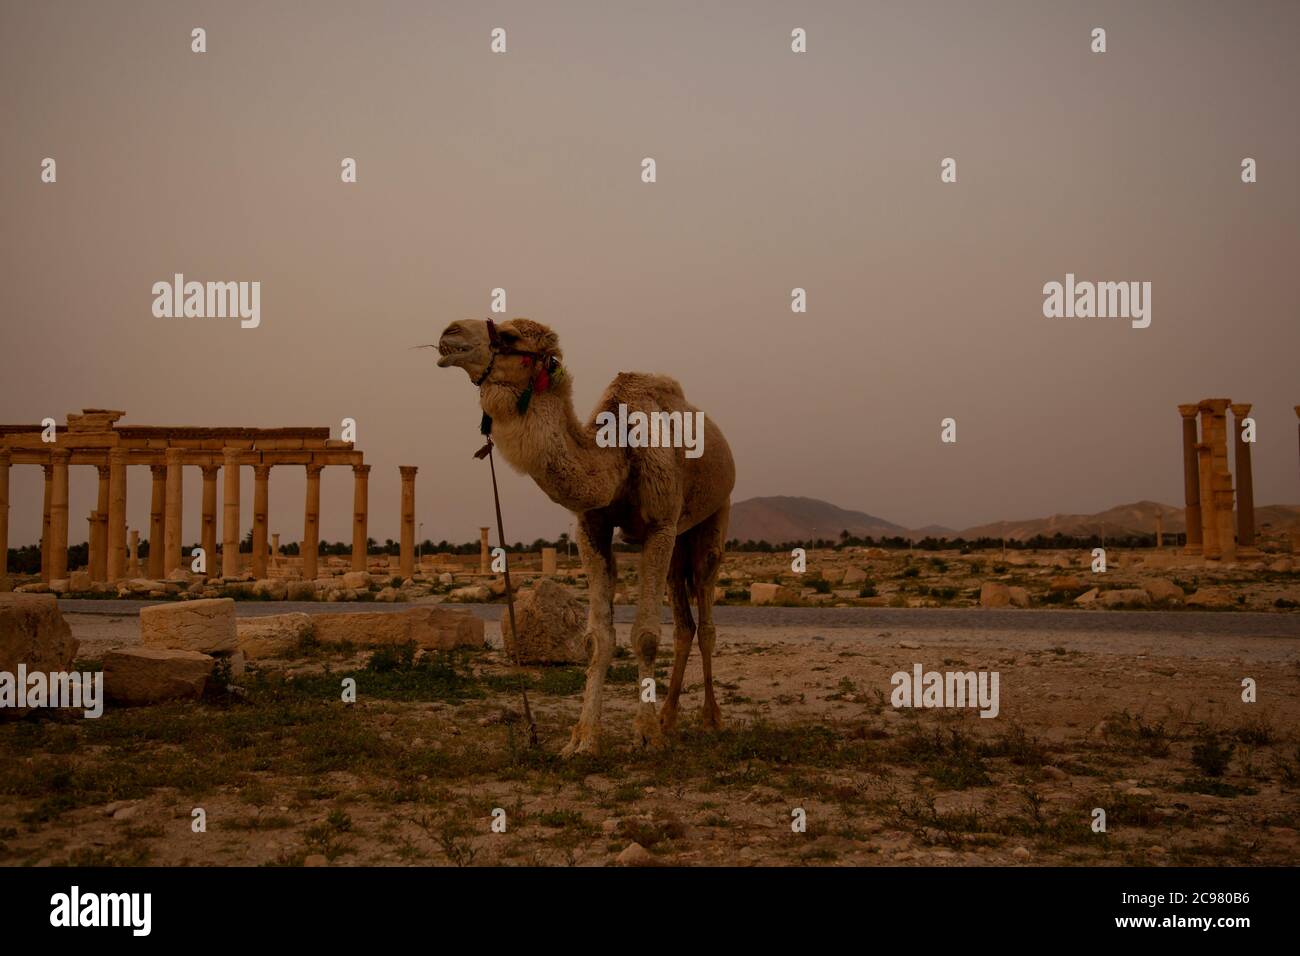 image of a camel at sunrise in the ancient ruins of Palmyra. Image features the animal in the focus including the mouth bit, decorative objects and th Stock Photo